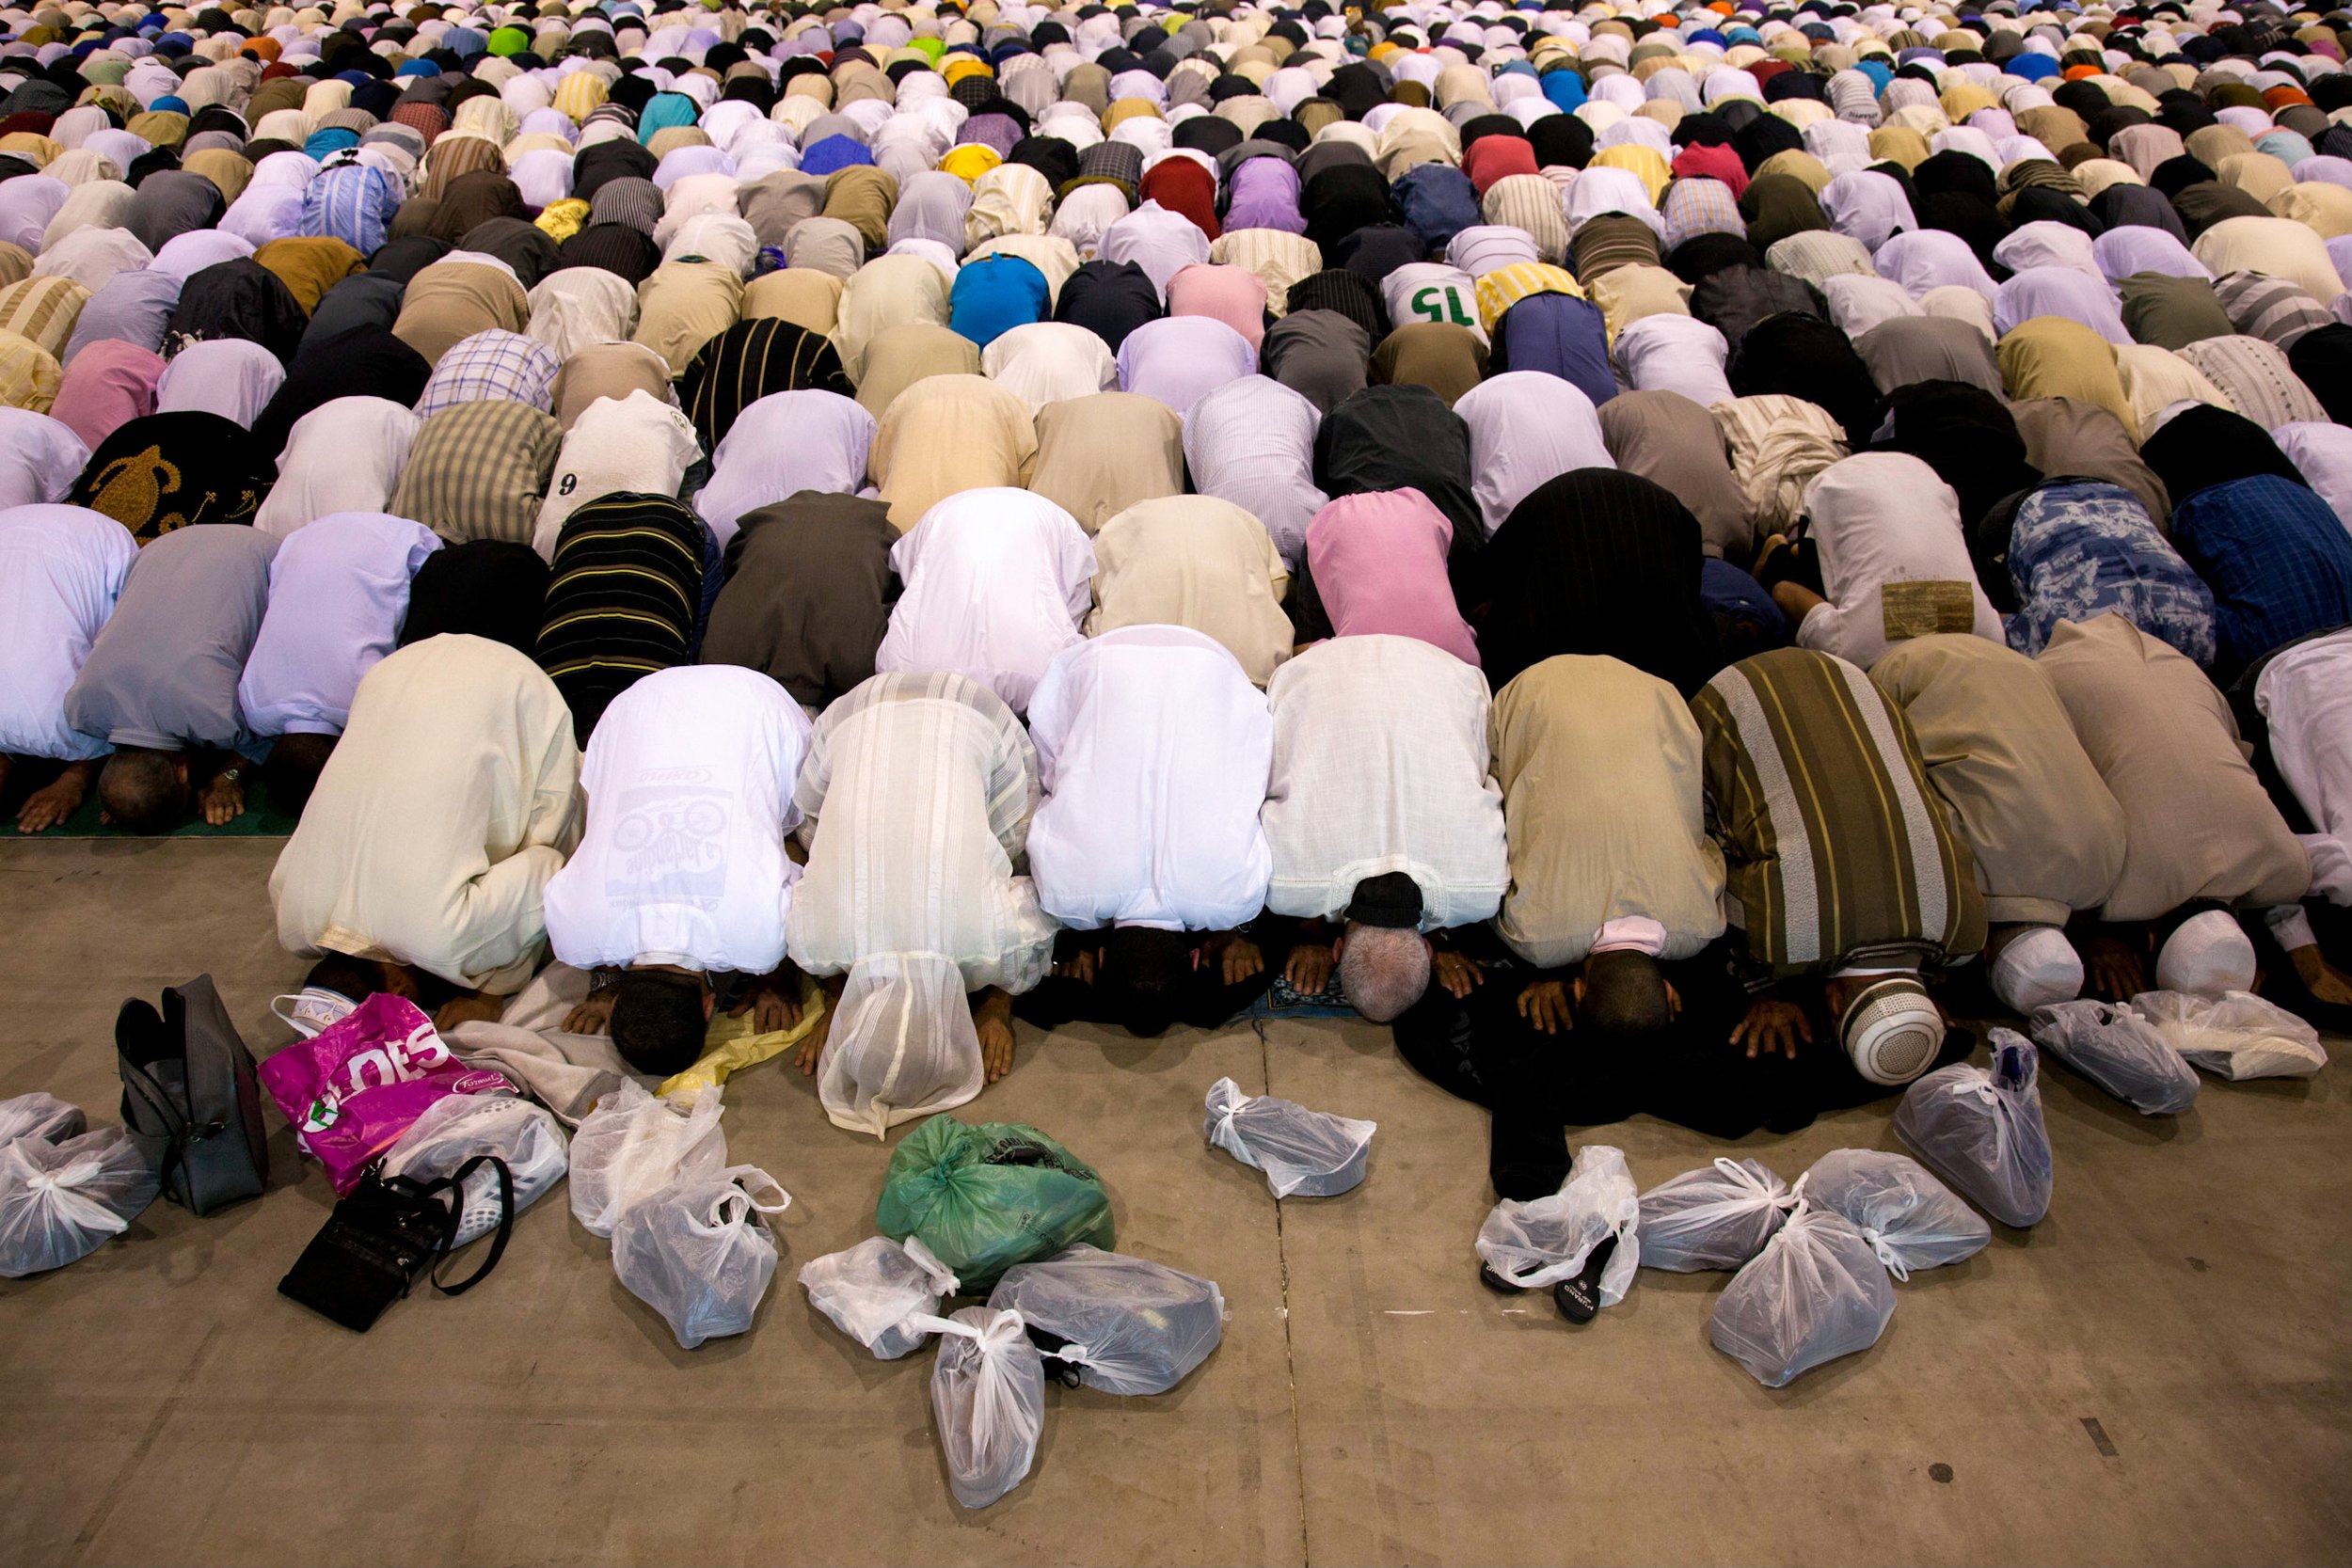  Muslims celebrate Eid al Fitr, the first day after Ramadan, at the Park Chanot complex in Marseille, France on Sept.10, 2010. 